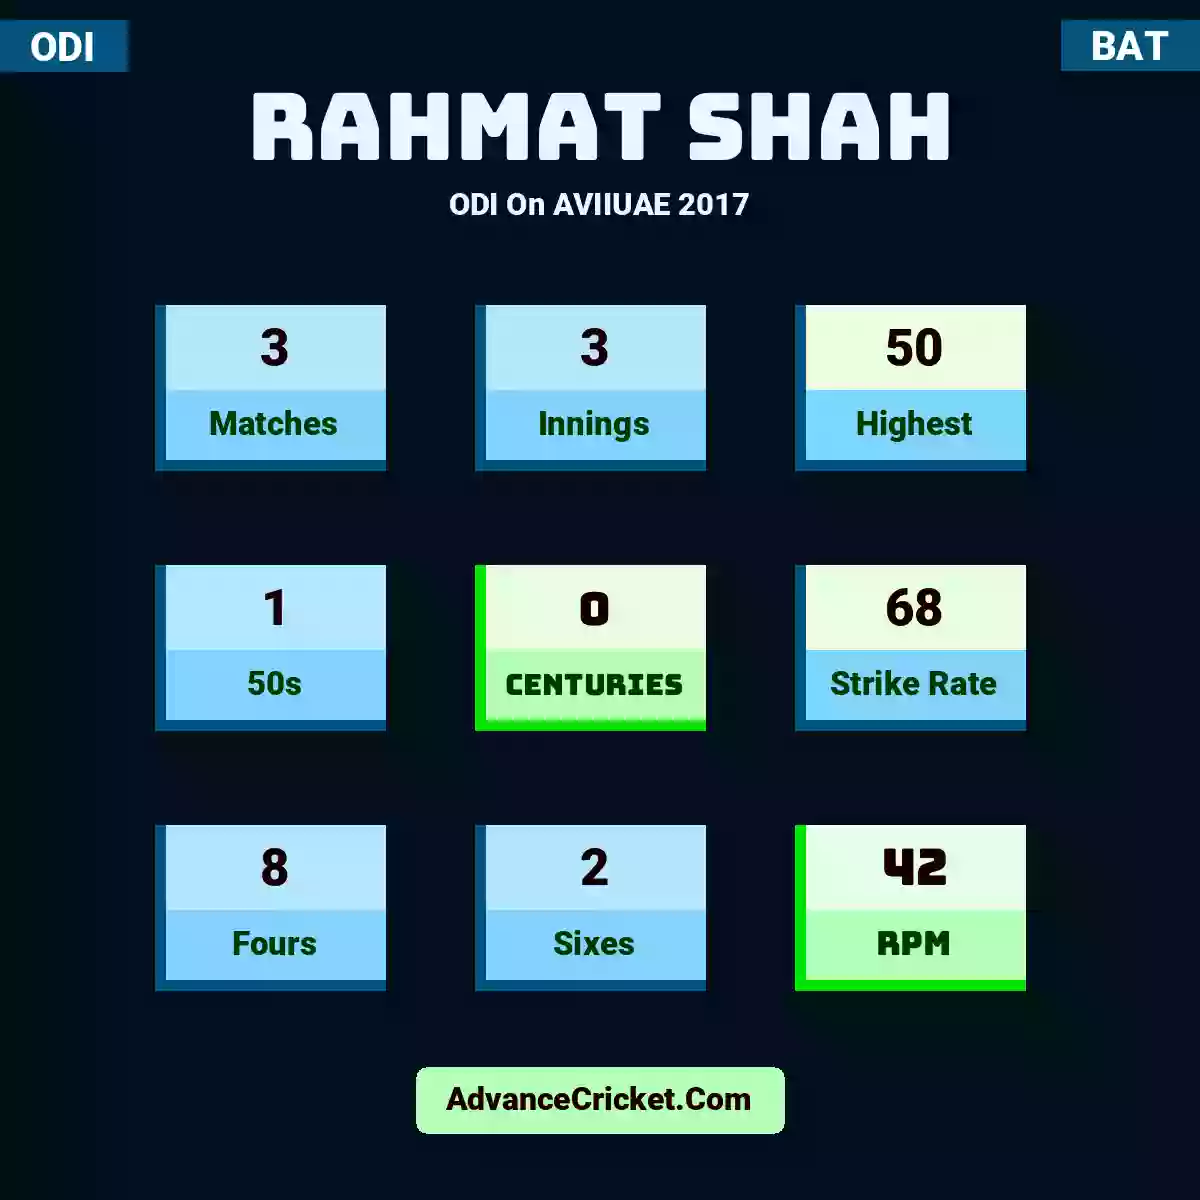 Rahmat Shah ODI  On AVIIUAE 2017, Rahmat Shah played 3 matches, scored 50 runs as highest, 1 half-centuries, and 0 centuries, with a strike rate of 68. R.Shah hit 8 fours and 2 sixes, with an RPM of 42.